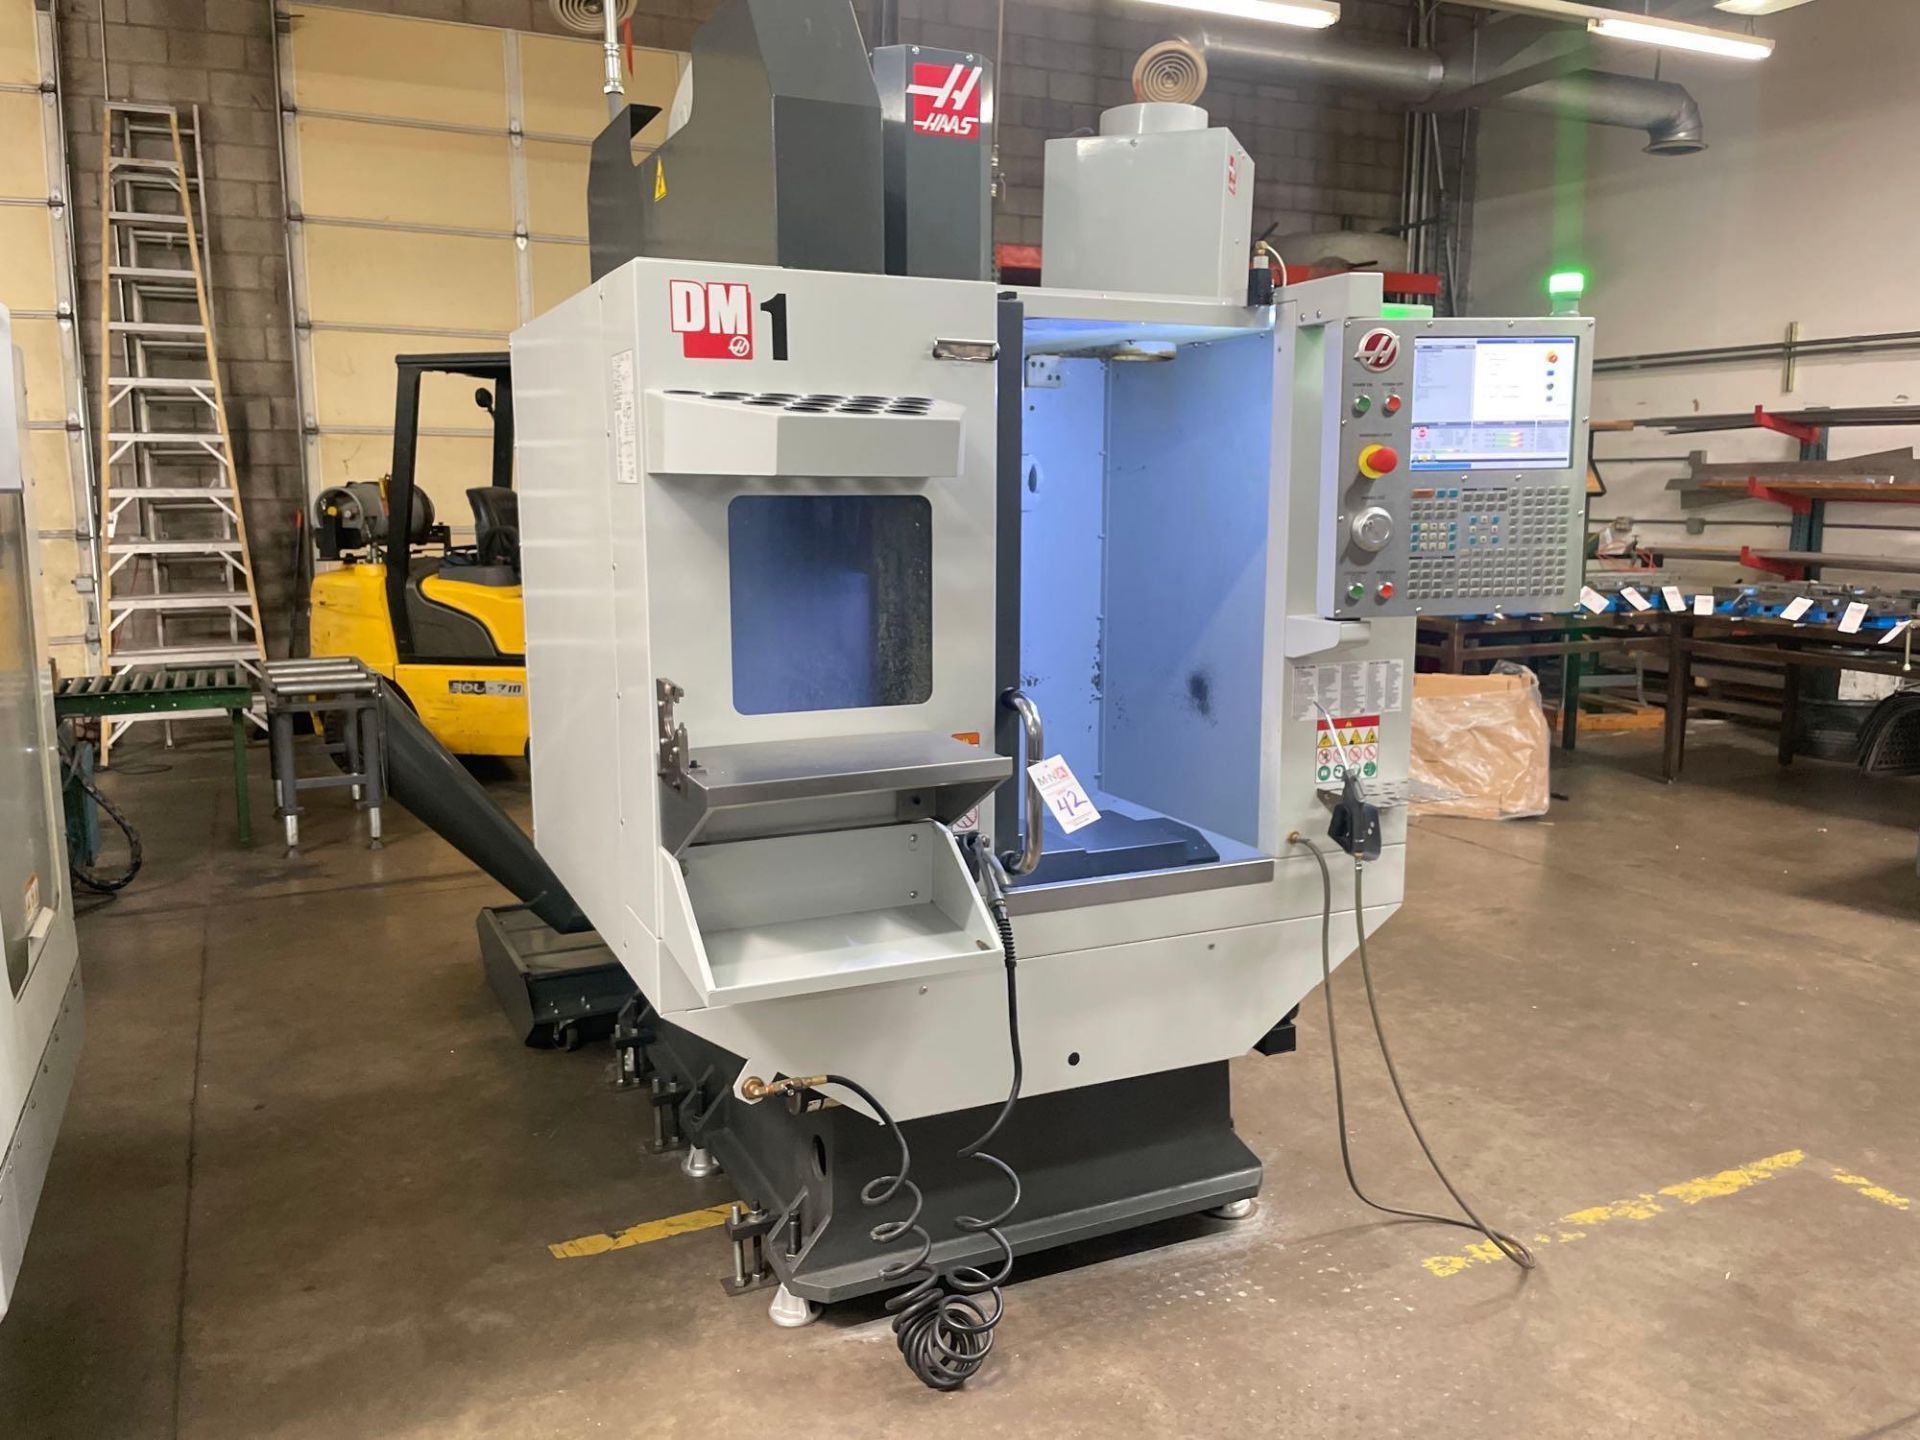 HAAS DM-1 Vertical Machining Center, 4th- Axis Ready, 20” x 16” x 15.5” Trvls., 15k RPM, New 2017 - Image 3 of 12